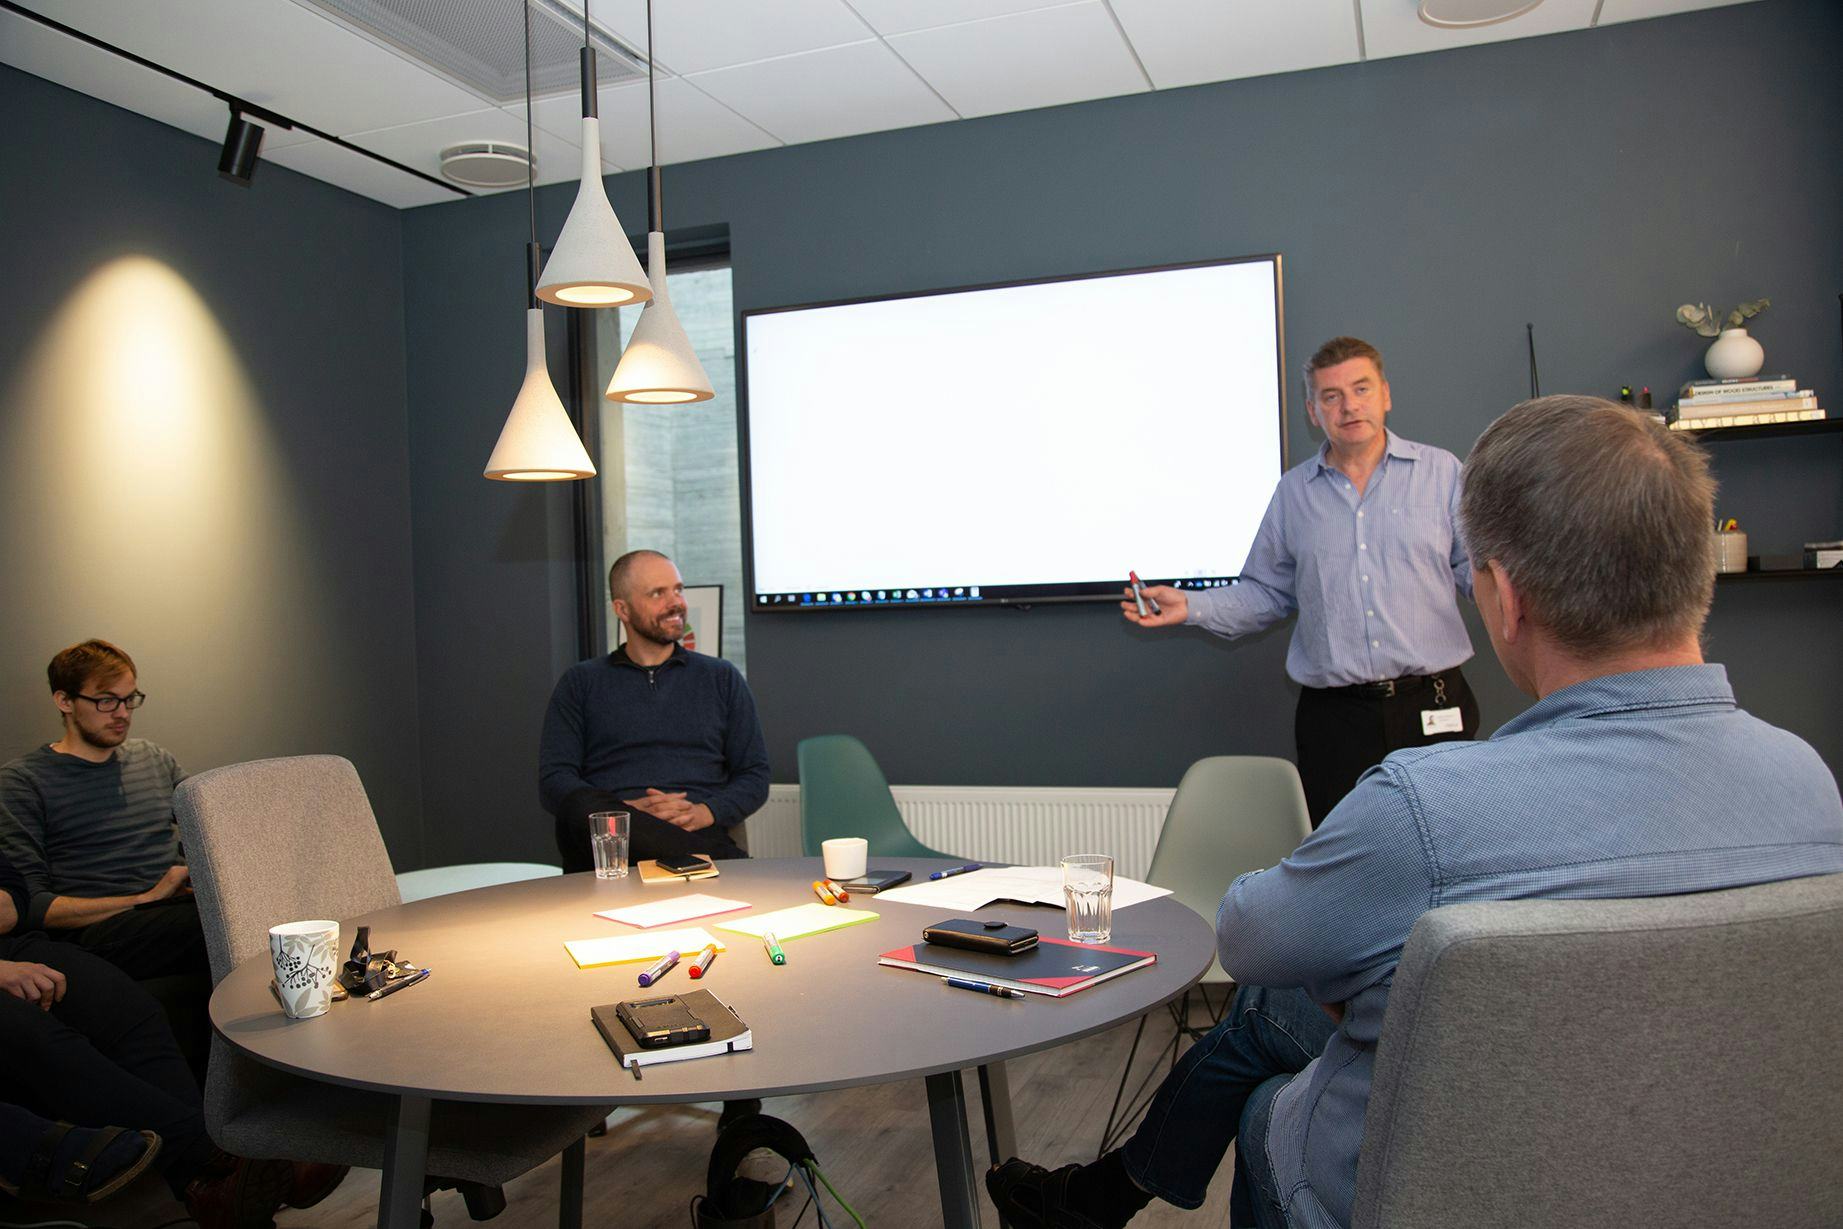 A man presenting to a small group of people in a meeting room with big screen and modern decor